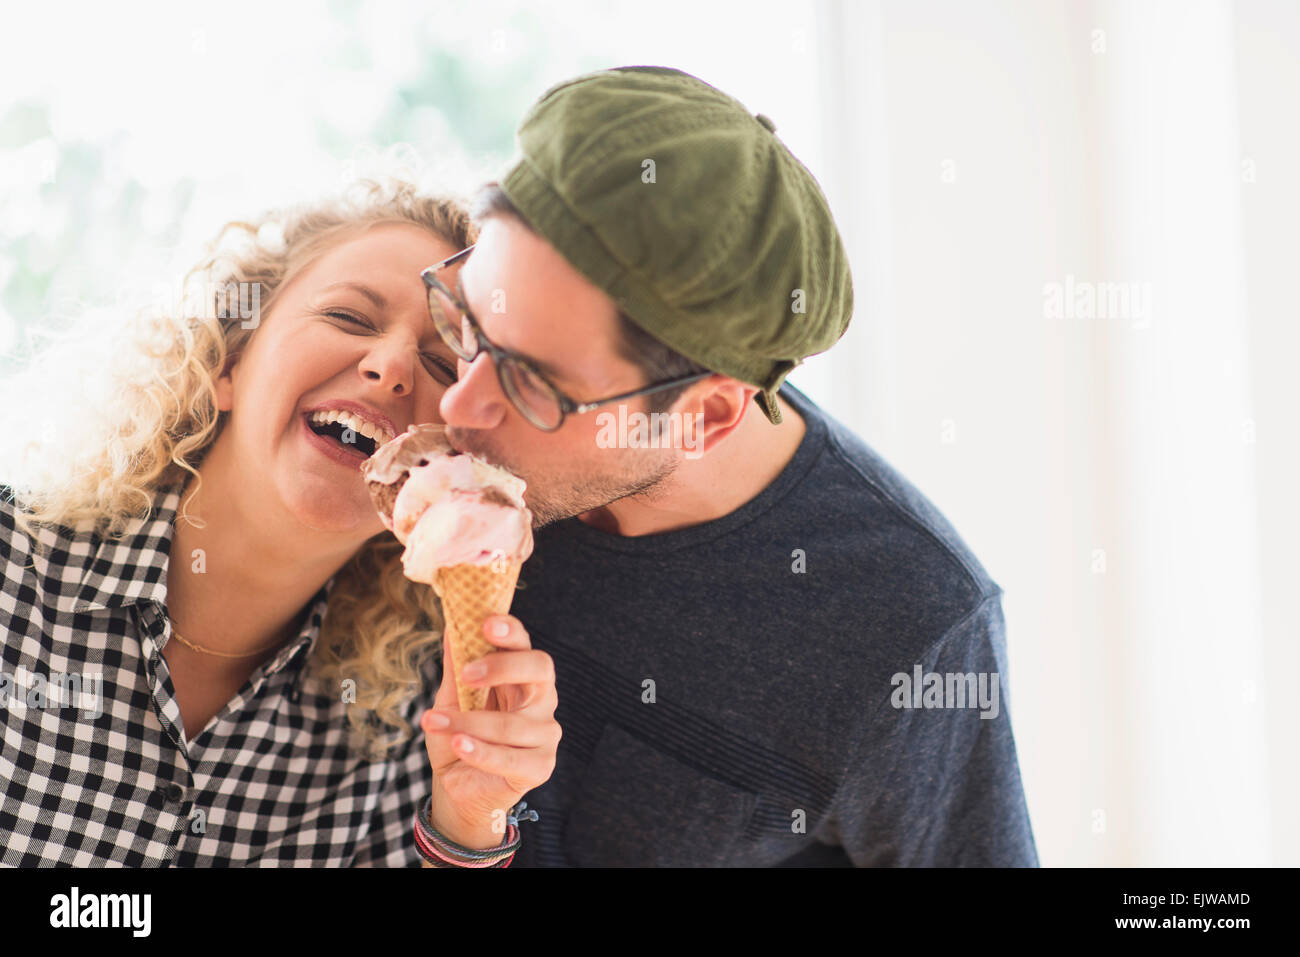 Couple eating ice cream together Stock Photo